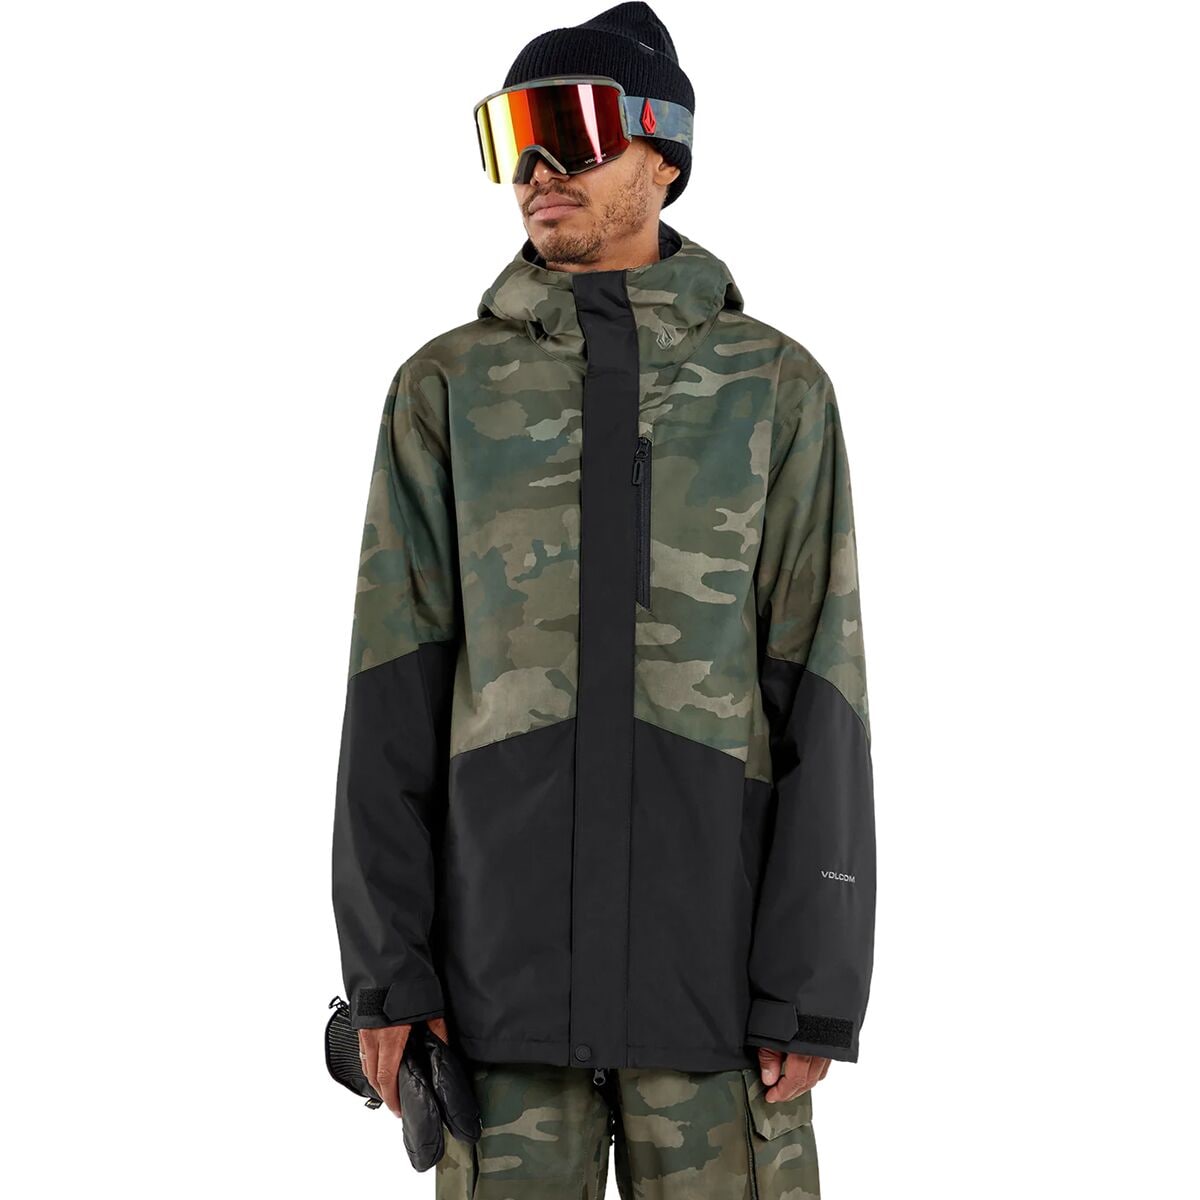 VCOLP Insulated Jacket - Men